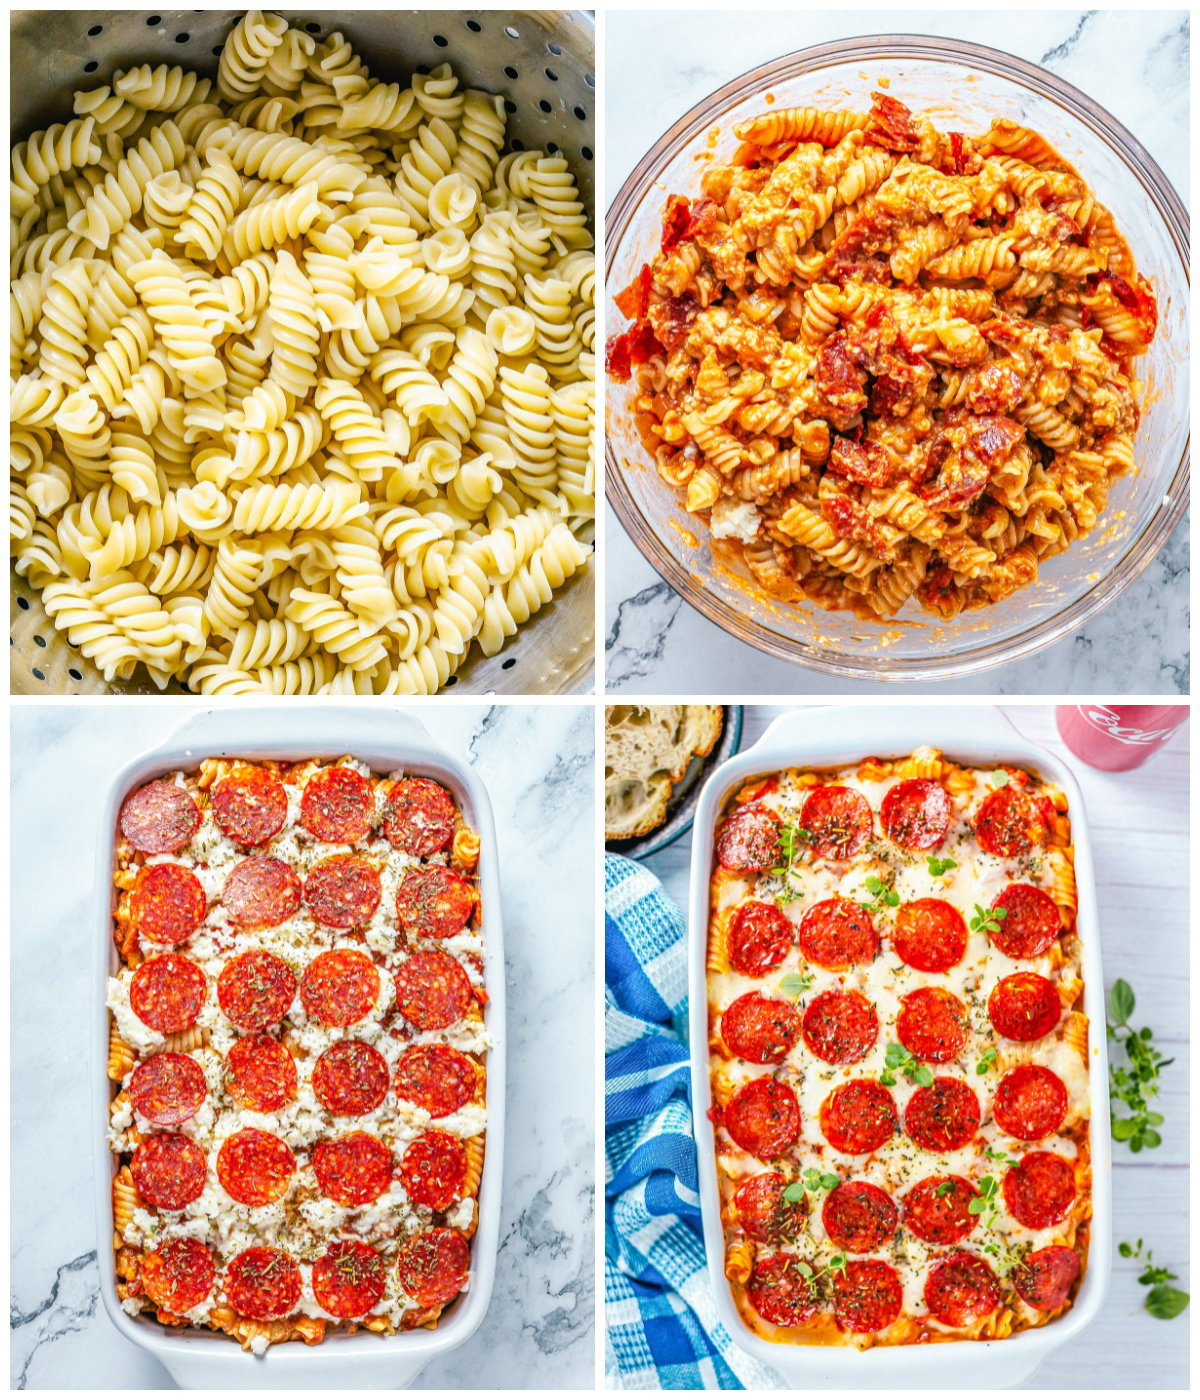 Step by step photos on how to make Pizza Pasta Bake